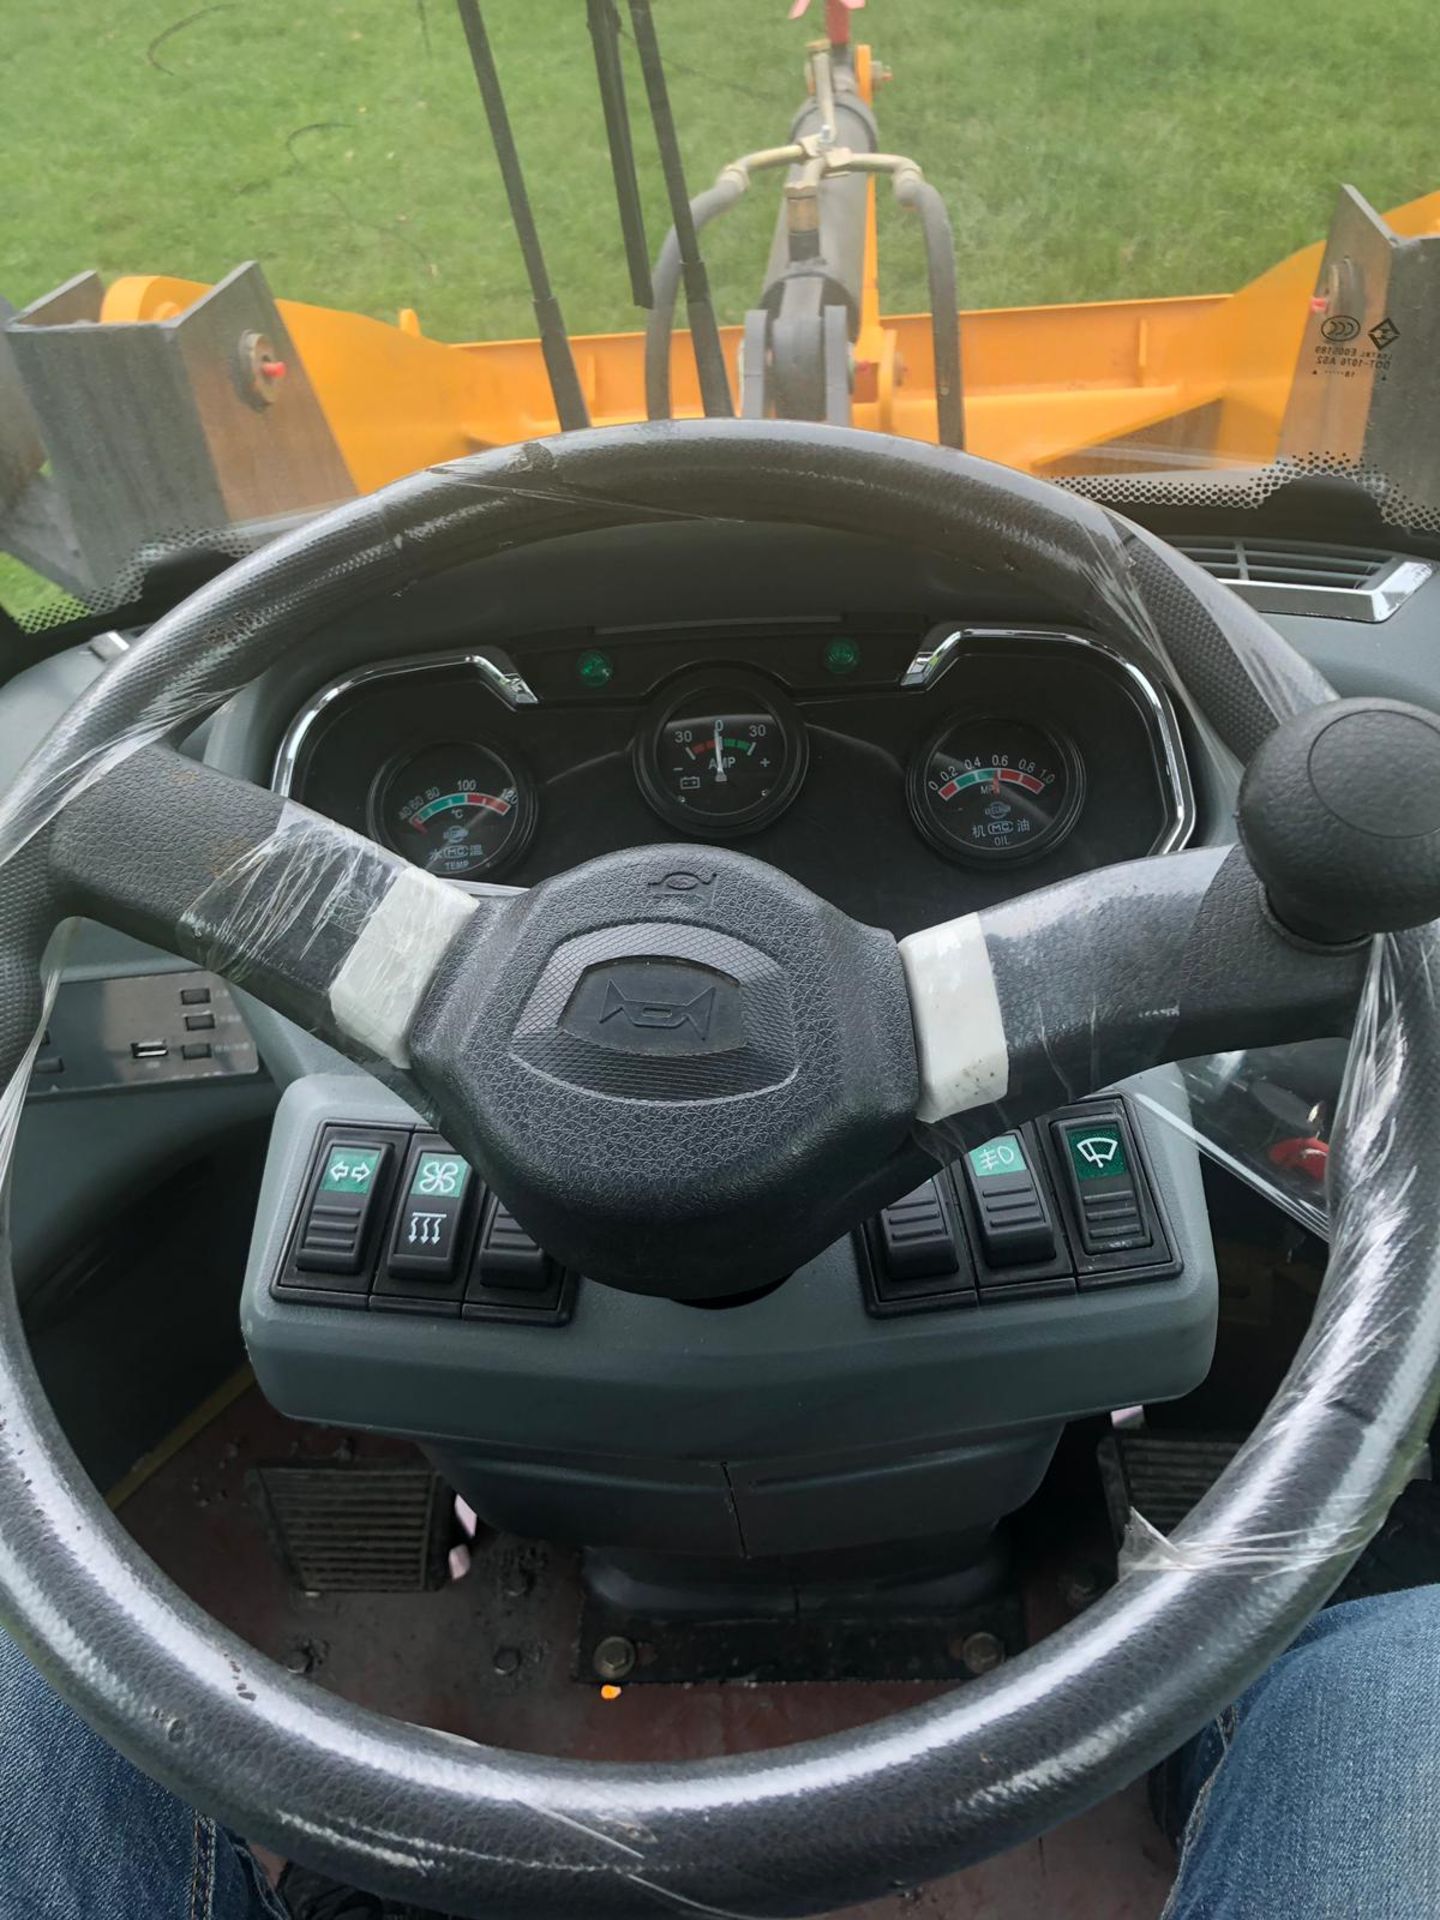 2019 BRAND NEW AND UNUSED ATTACK 1610 WHEEL LOADER, RUNS WORKS AND LIFTS *PLUS VAT* - Image 8 of 9